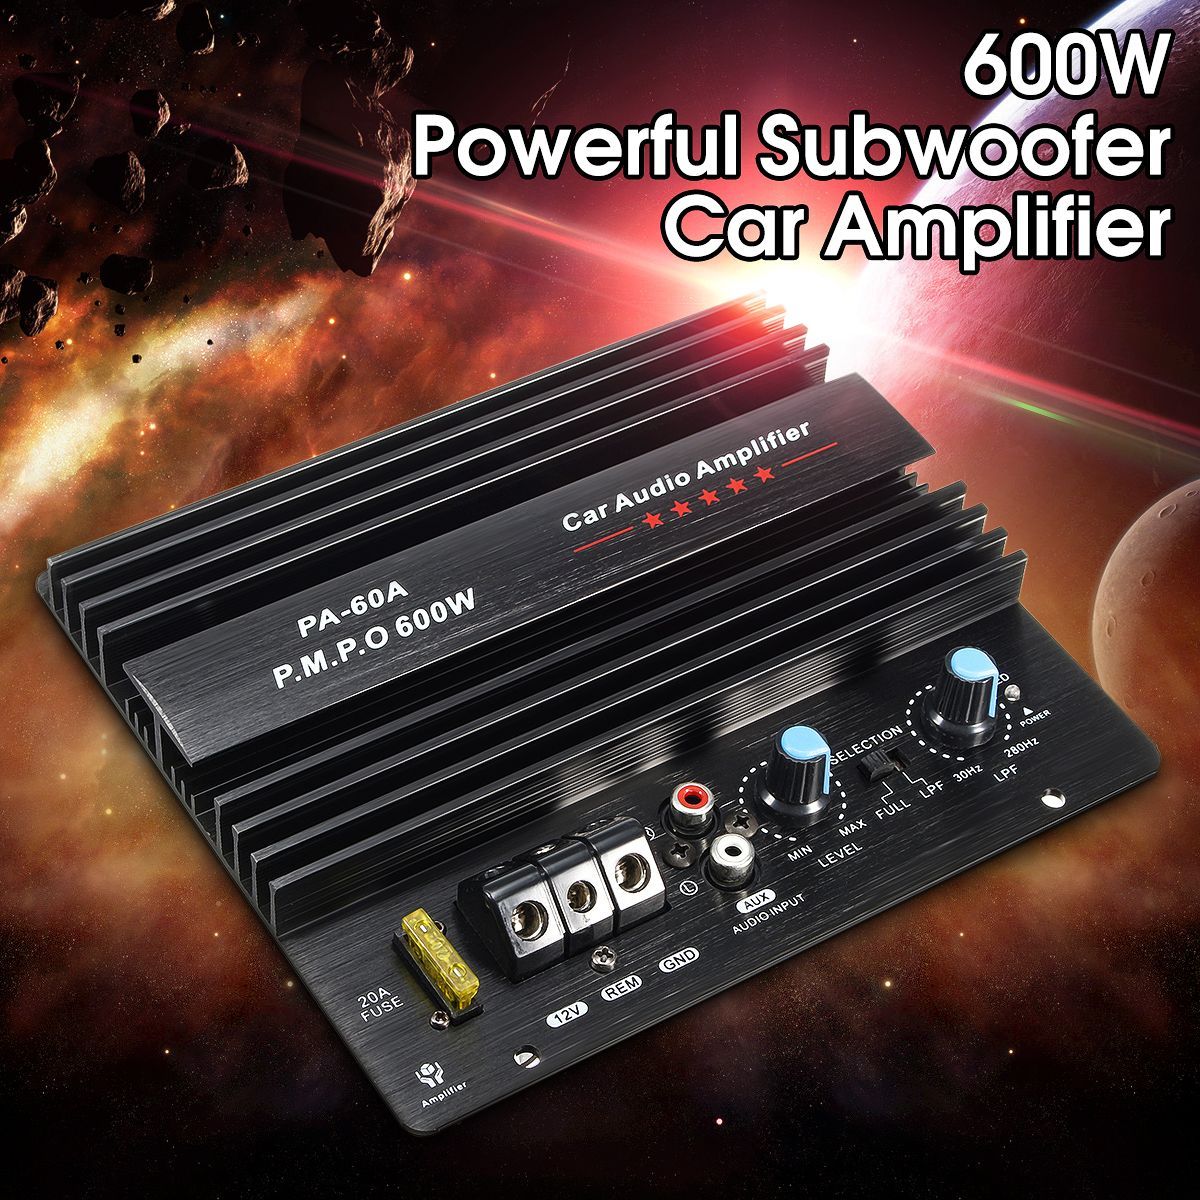 12V-600W-High-Power-Audio-Momo-Amplifier-Board-Car-Bass-Subwoofers-Amp-PA-60A-1176620